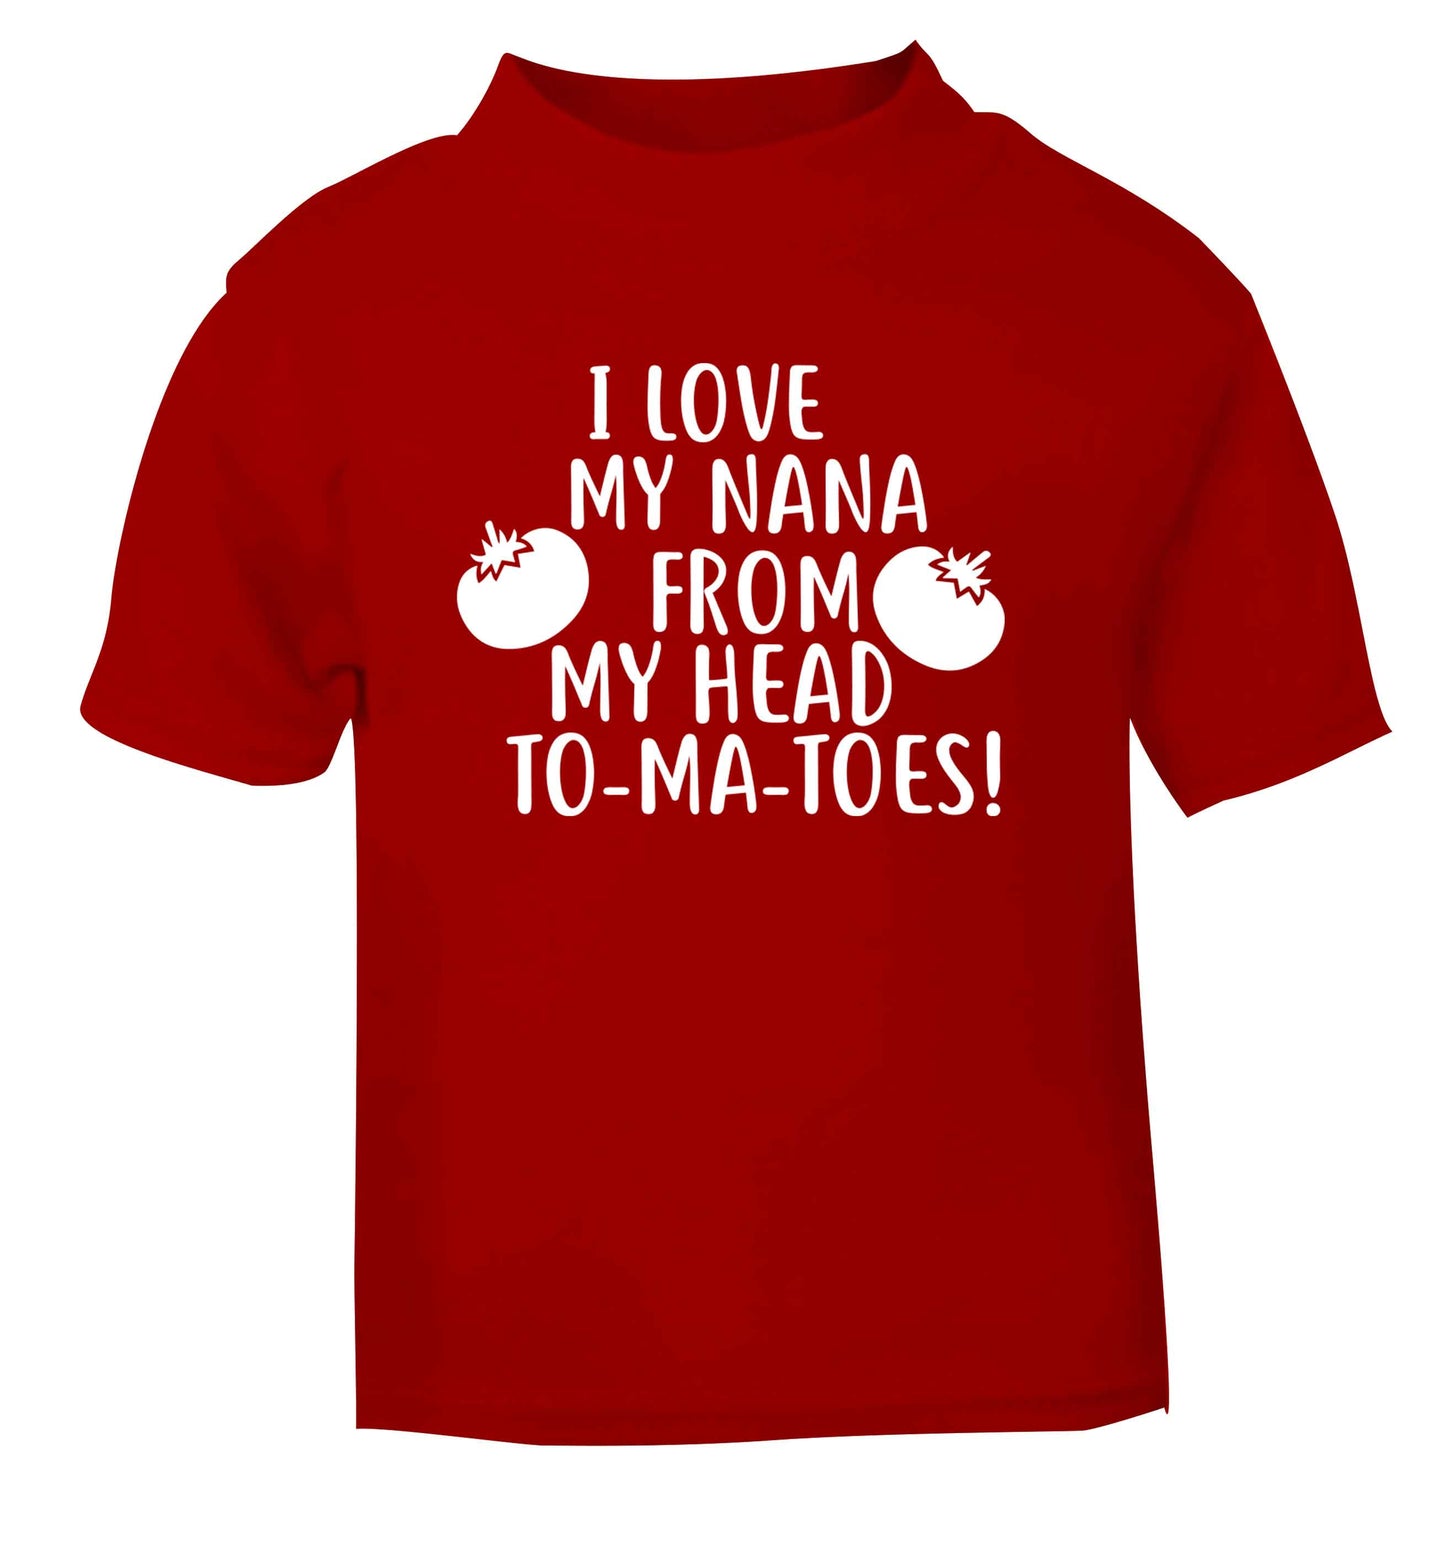 I love my nana from my head to-ma-toes red Baby Toddler Tshirt 2 Years